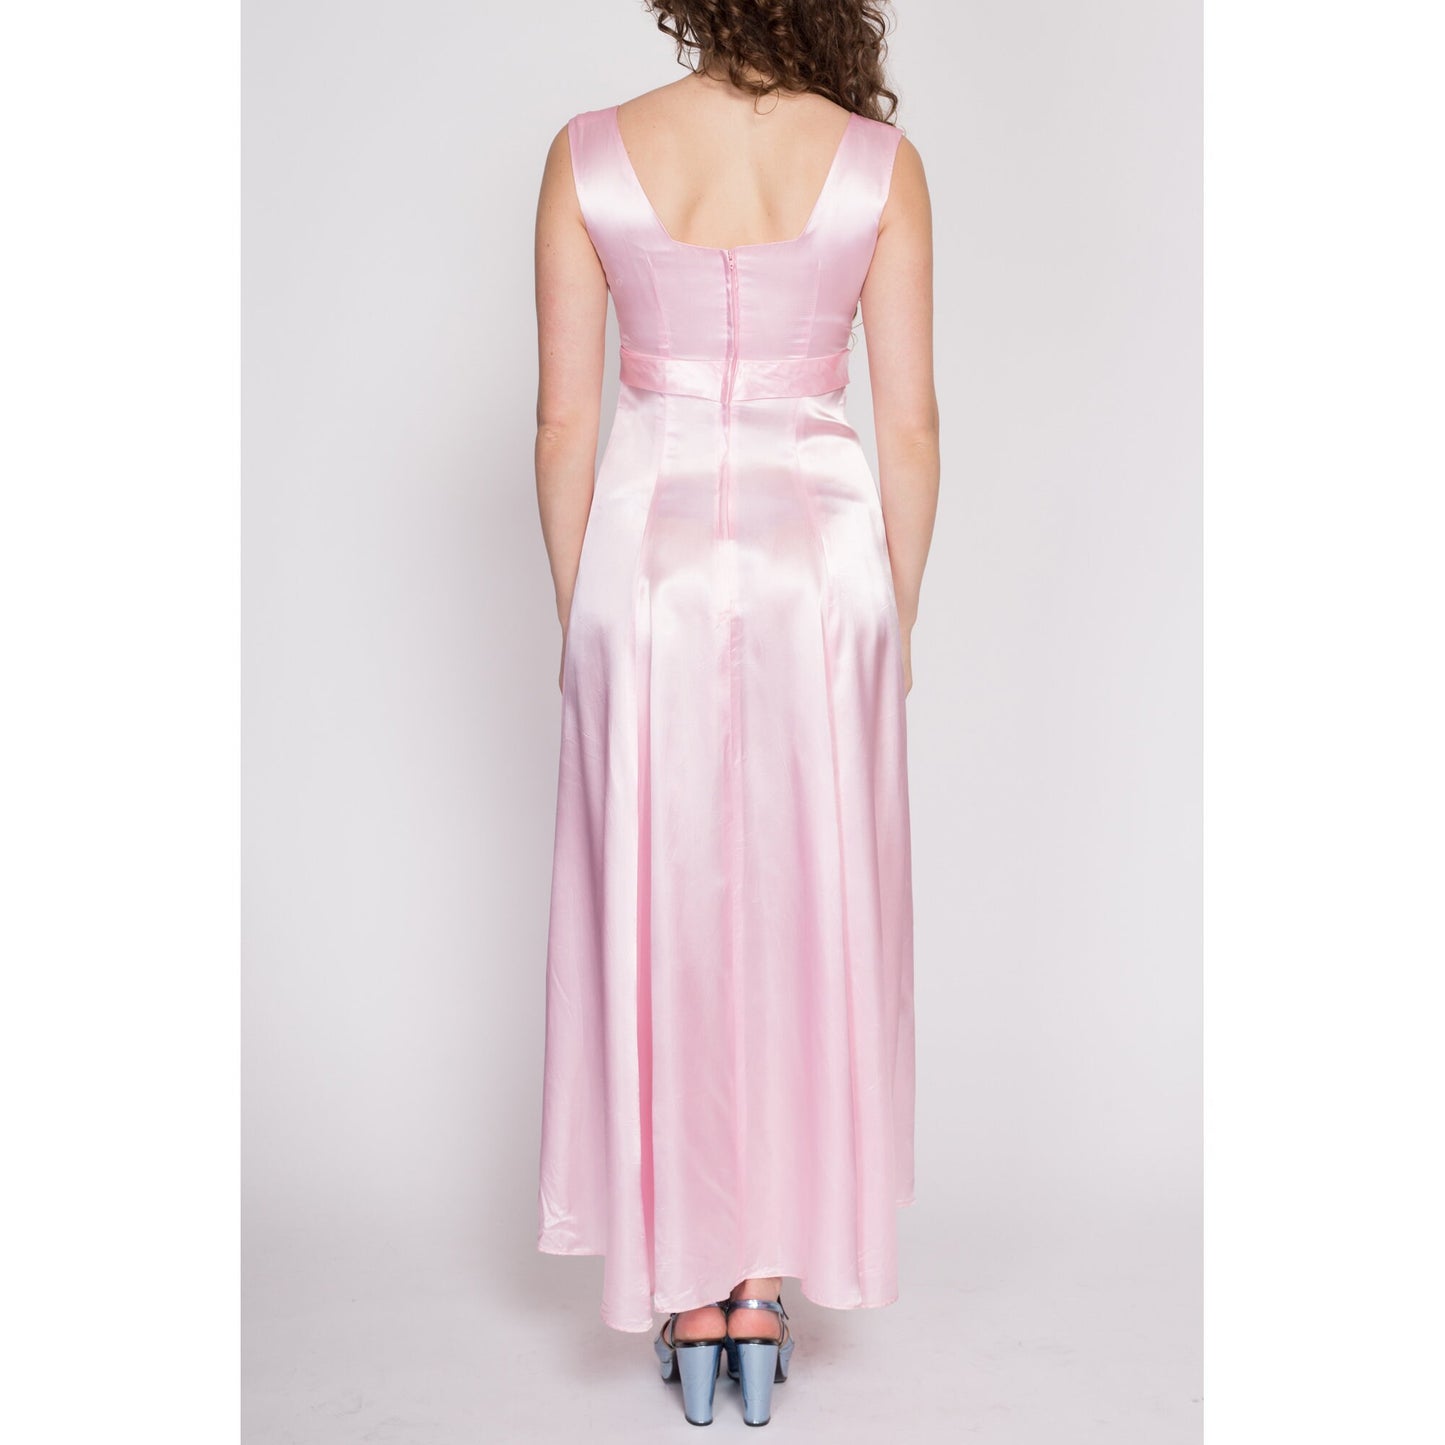 S| 70s Pink Satin Maxi Dress - Small | Vintage A Line Empire Waist Sleeveless Party Gown